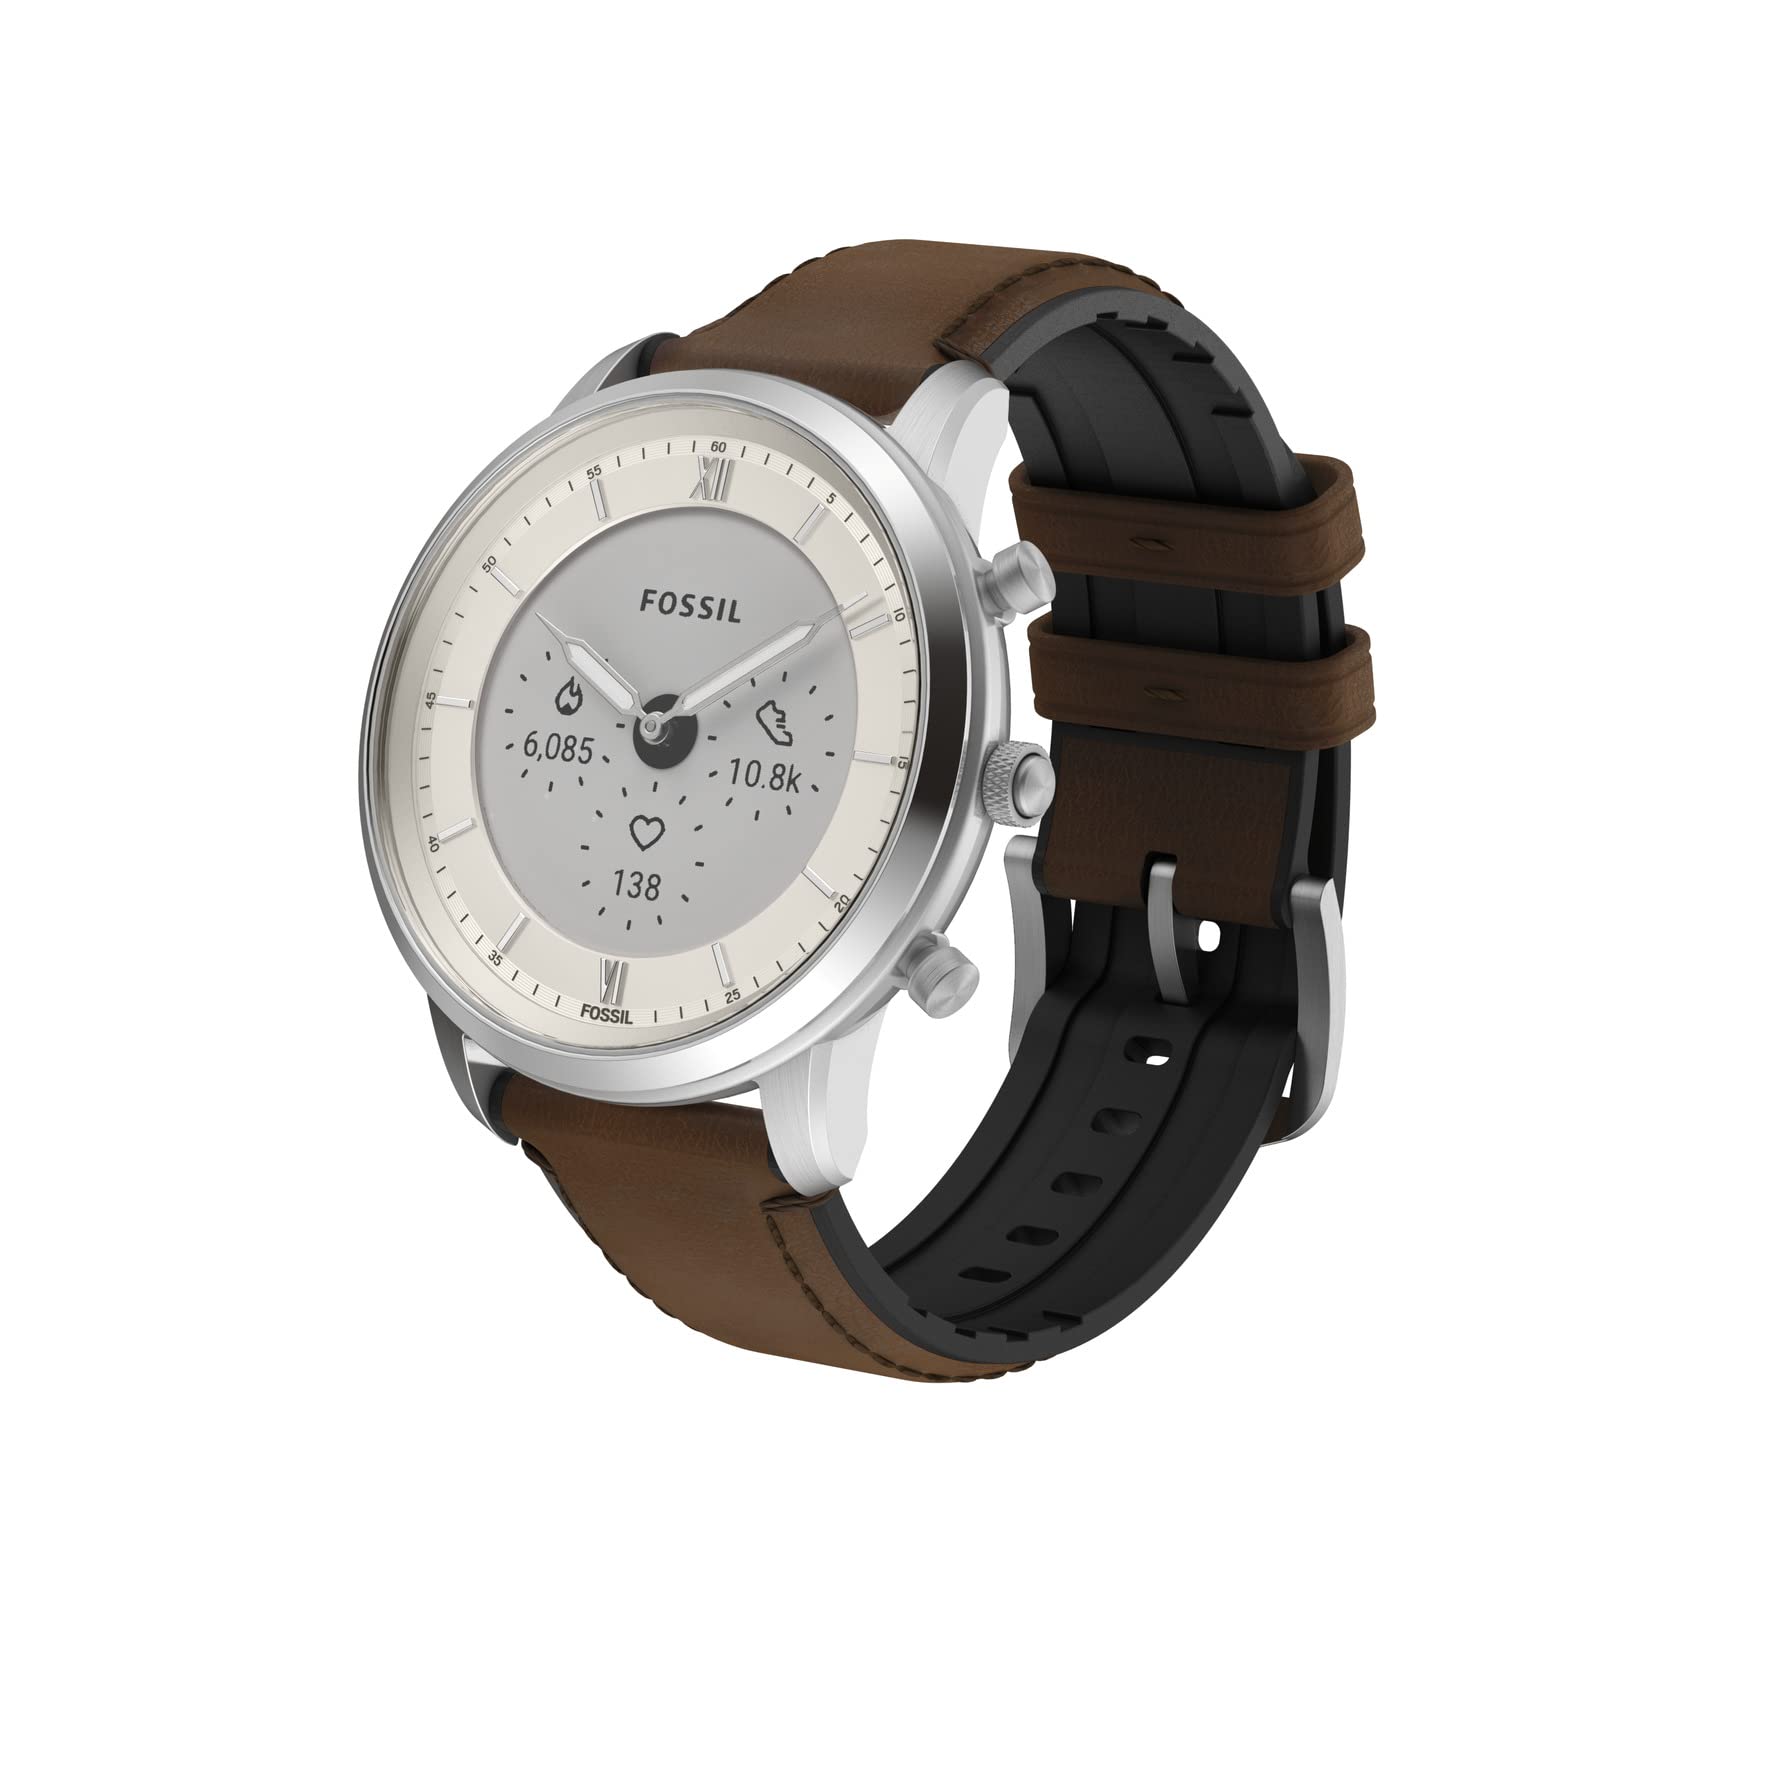 Fossil Men's Neutra Gen 6 Hybrid 44mm Stainless Steel and Leather Smart Watch, Color: Silver, Brown (Model: FTW7073) $137.4